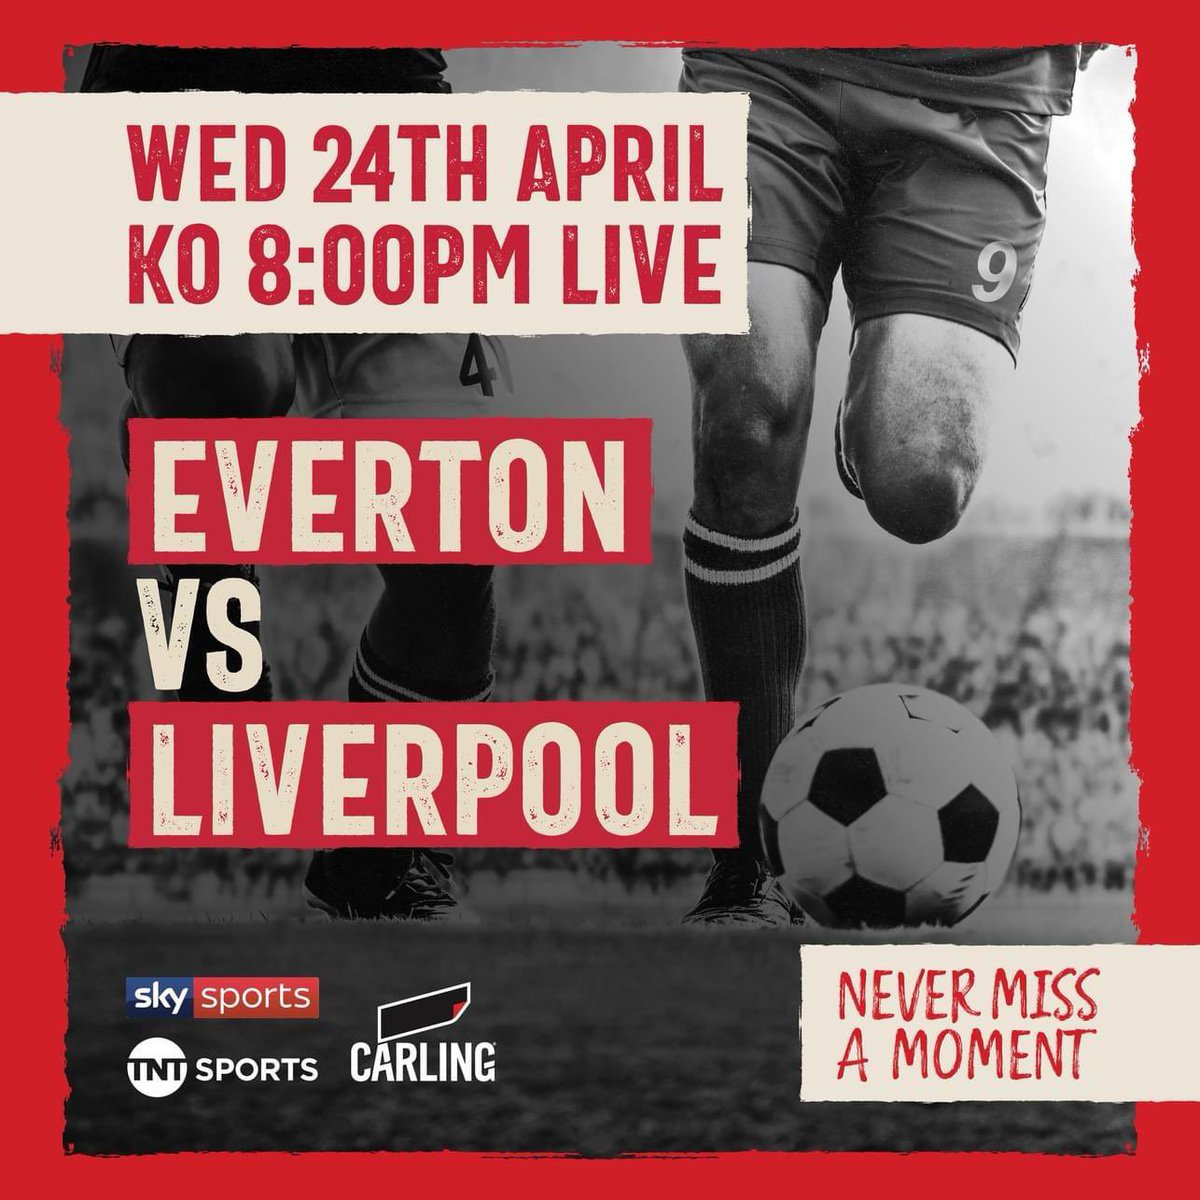 A huge Merseyside derby in the Premier league tonight.

Watch all the game with us and enjoy a bite to eat and drink at the same time.